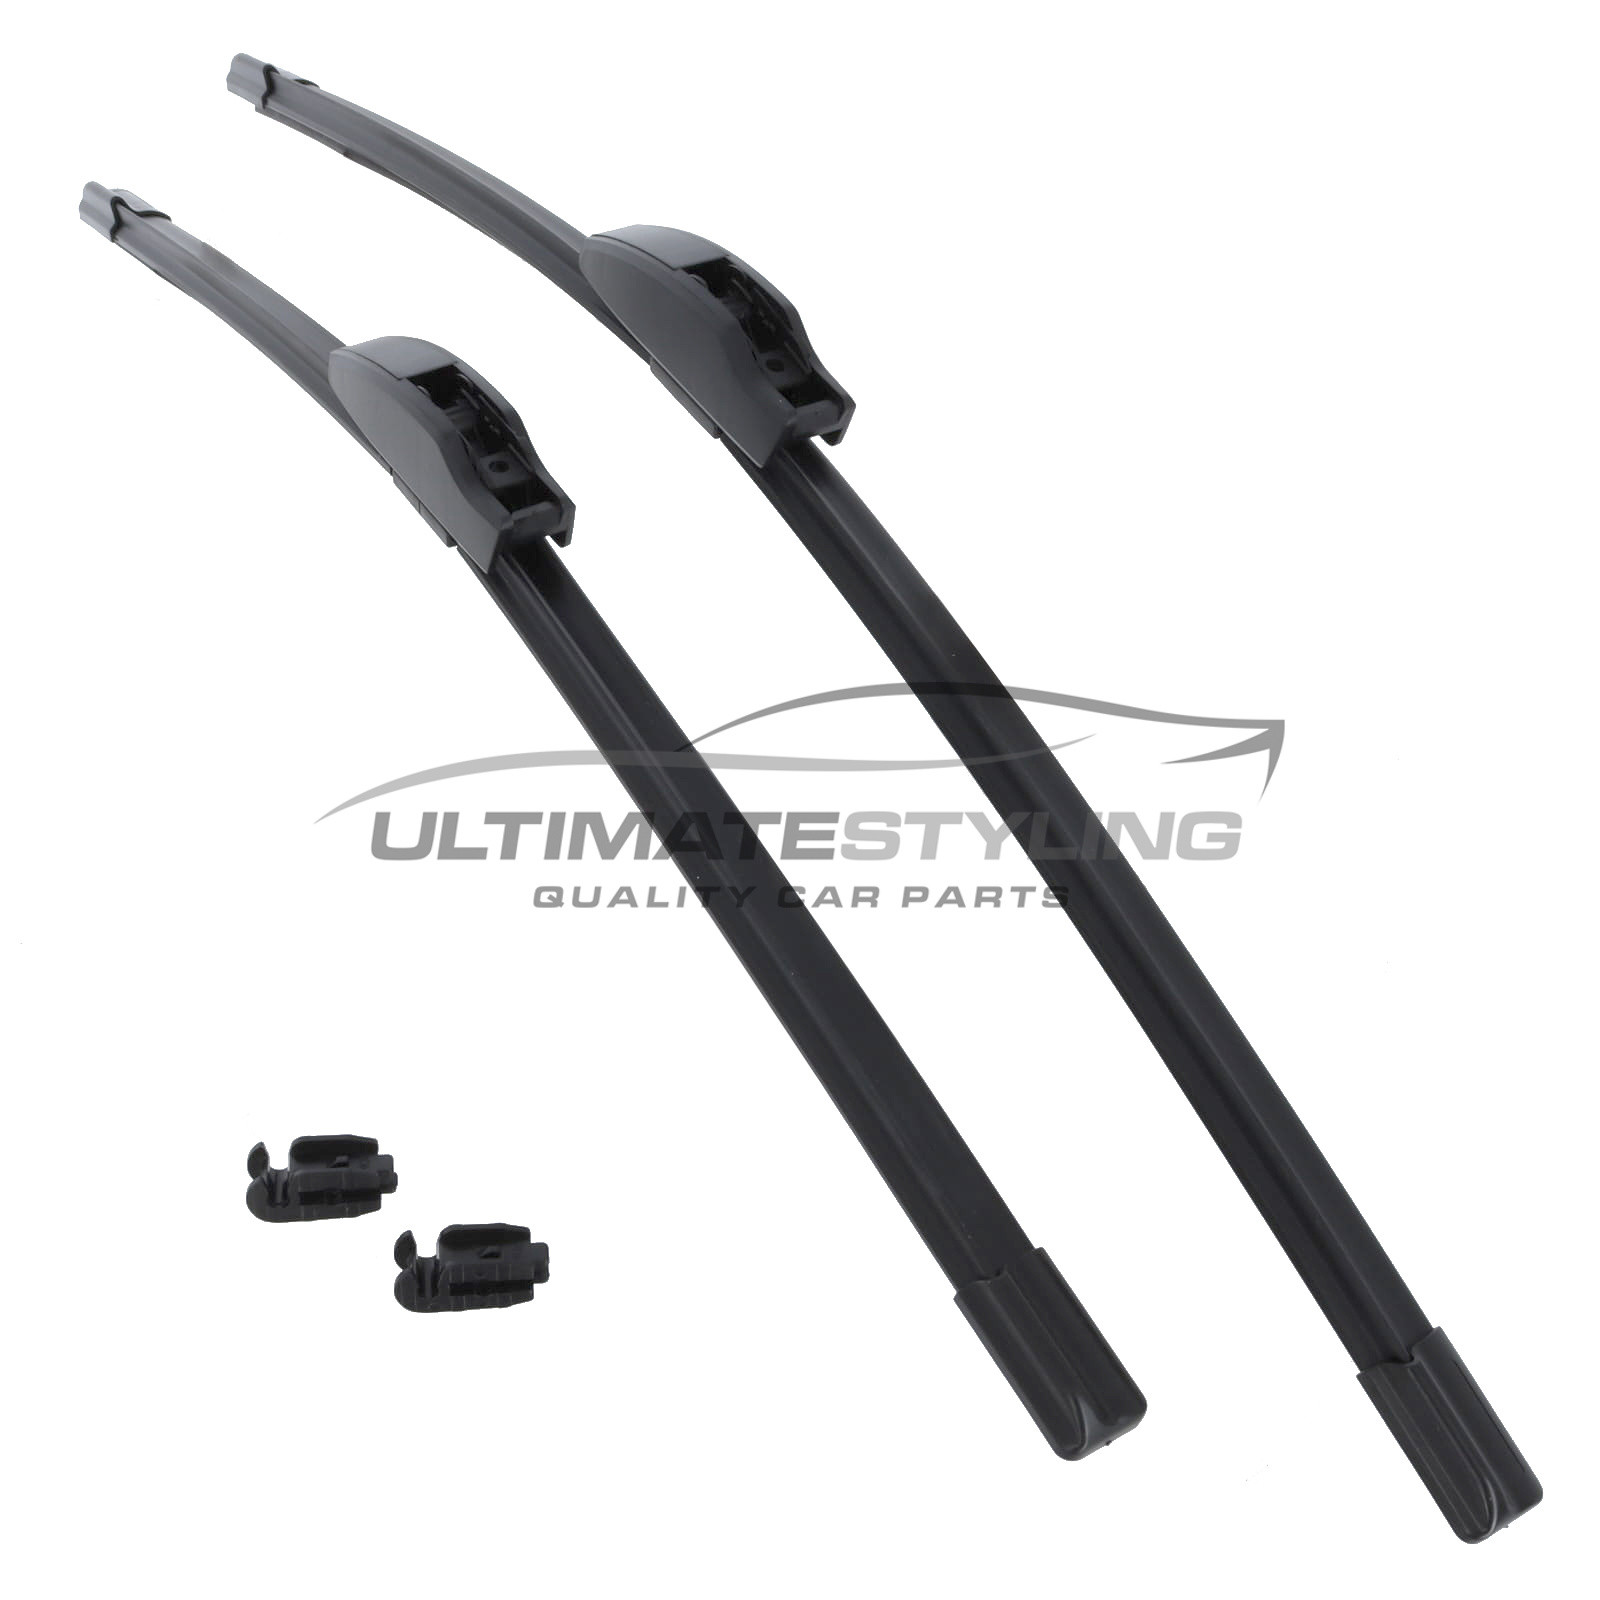 Drivers Side & Passenger Side (Front) Wiper Blades for Mitsubishi Galant